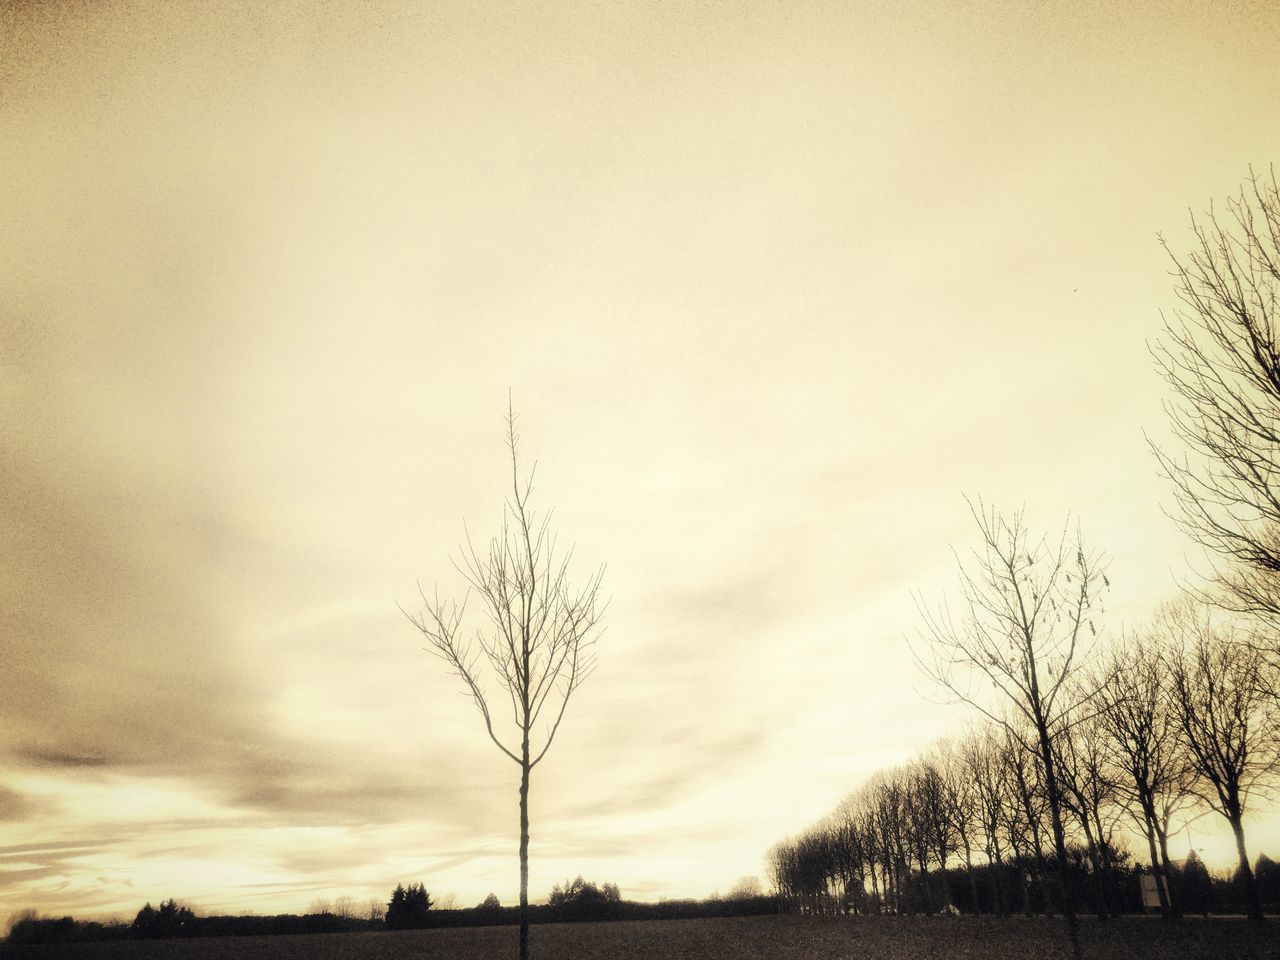 SILHOUETTE BARE TREES ON FIELD AGAINST SKY AT DUSK